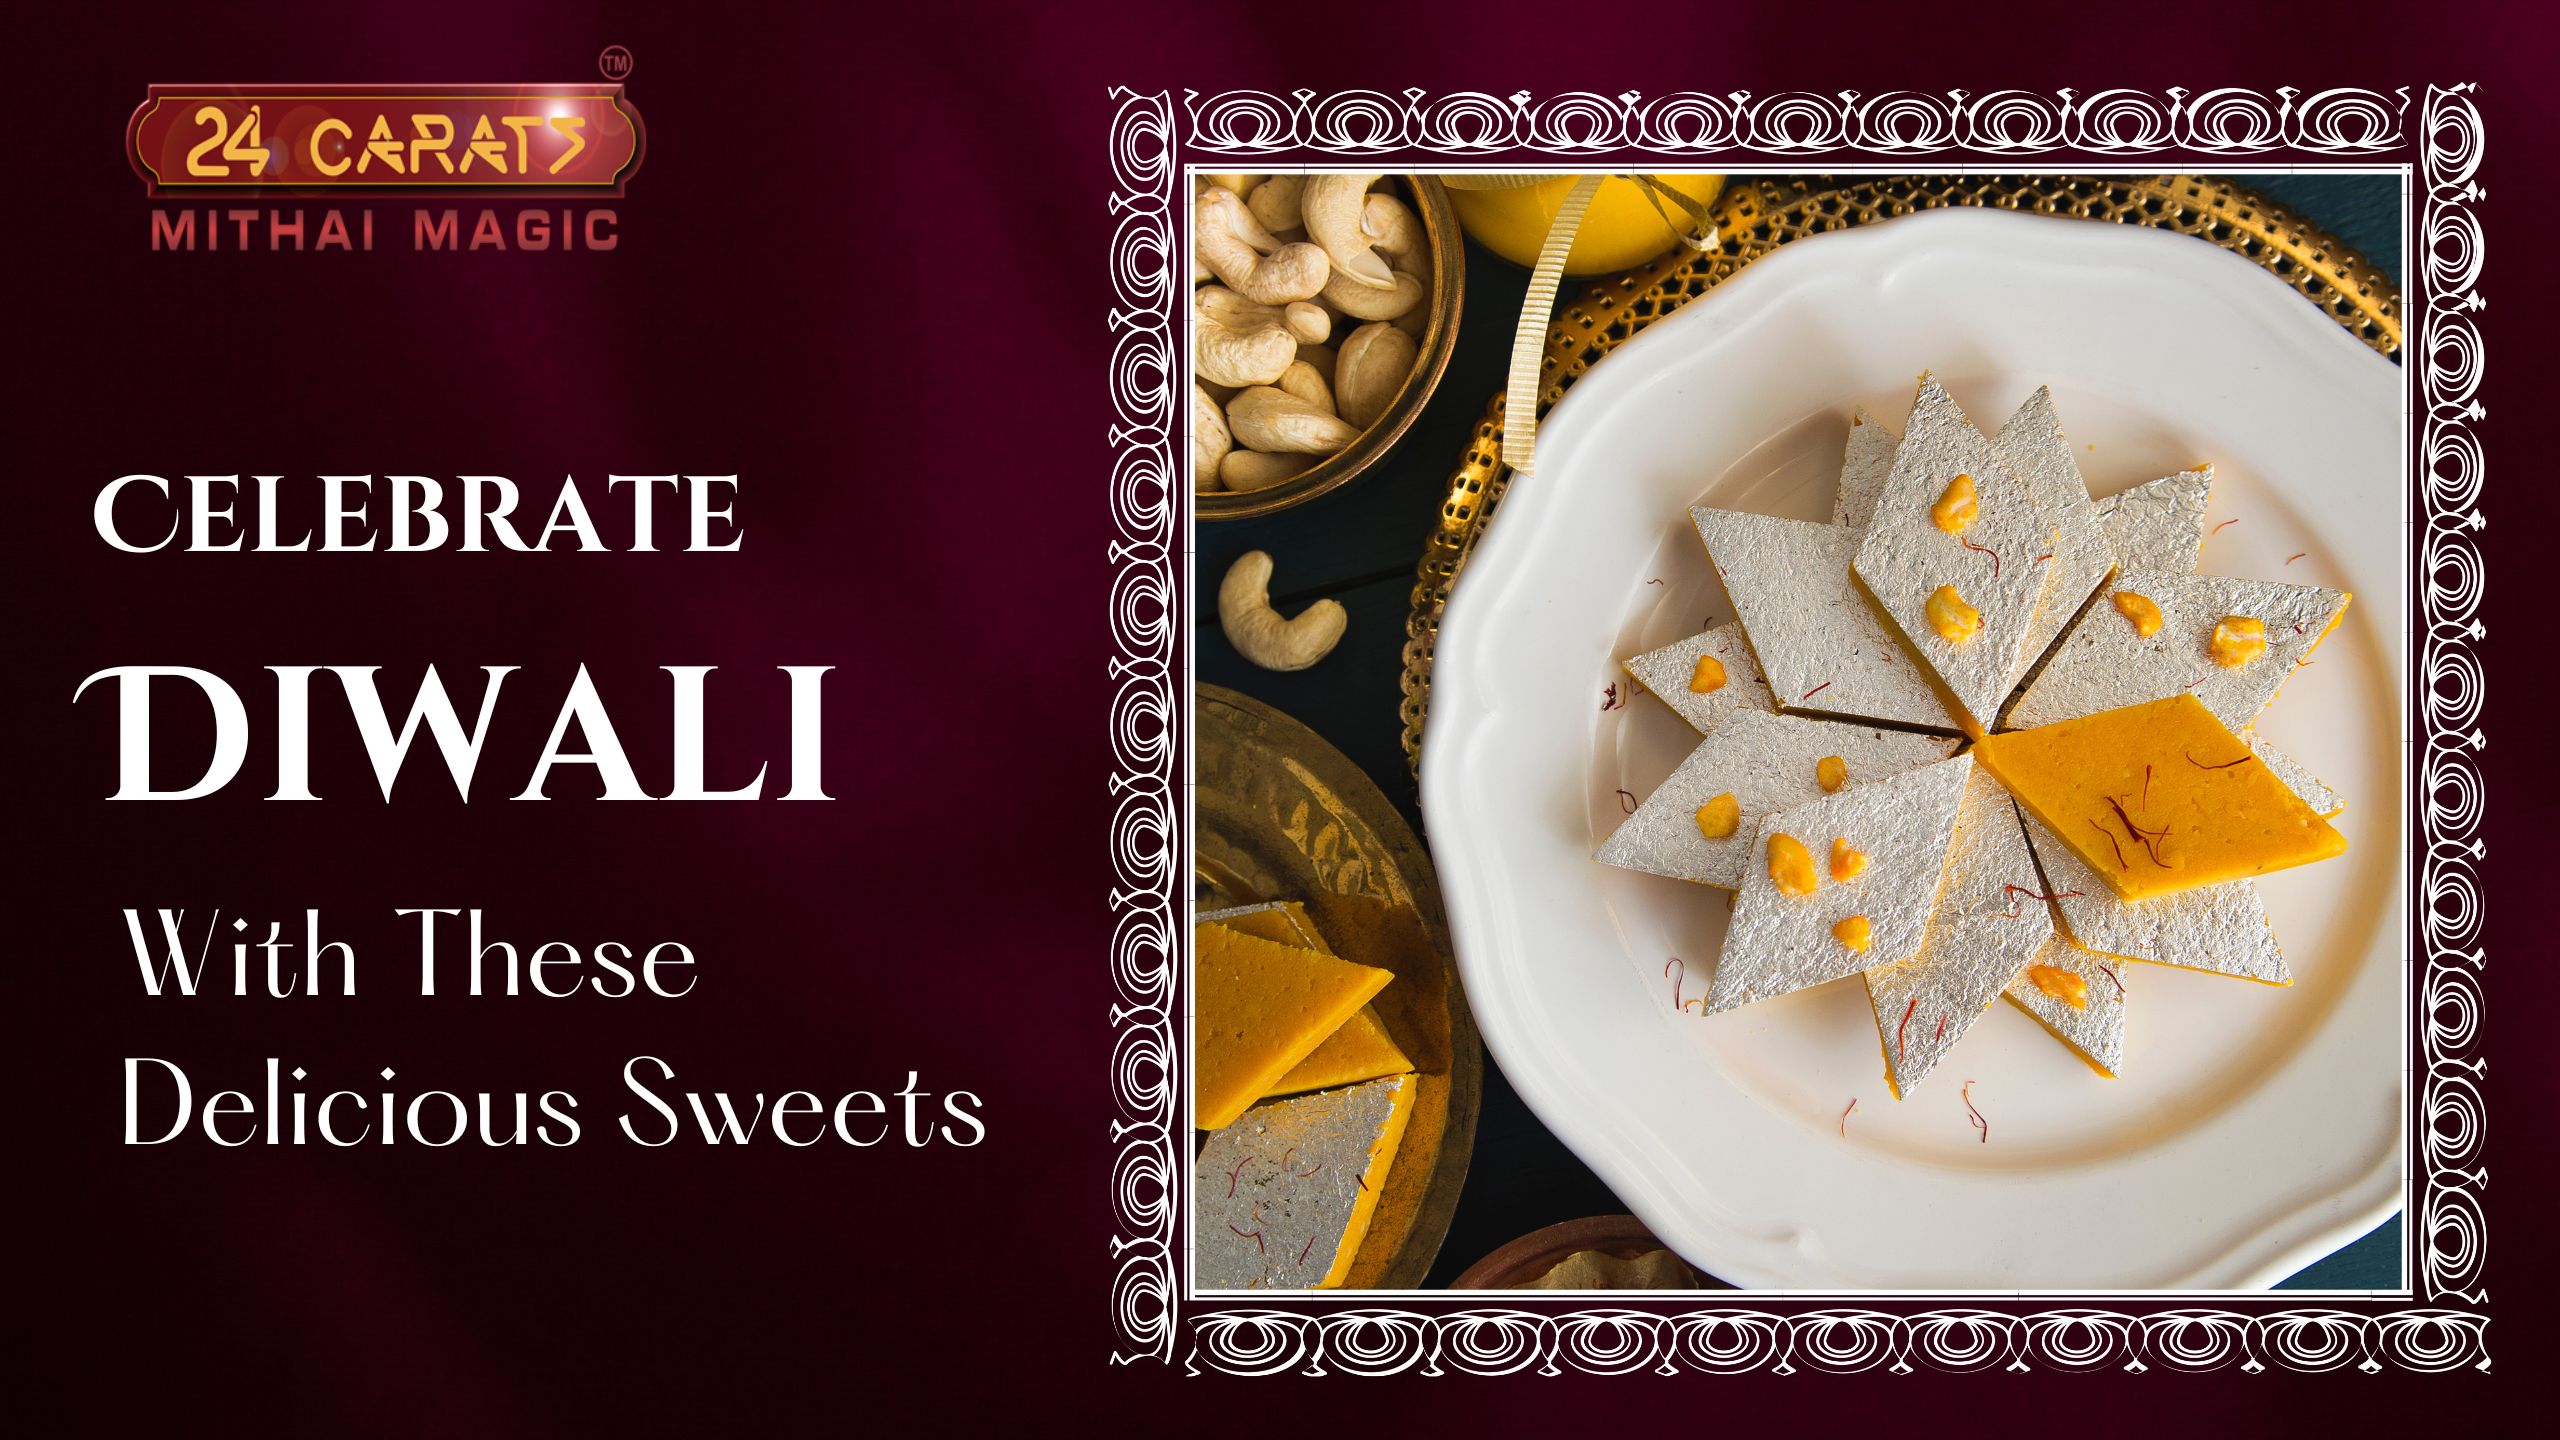 Celebrate Diwali With These Delicious Sweets – 24 Carat Mithai Magic